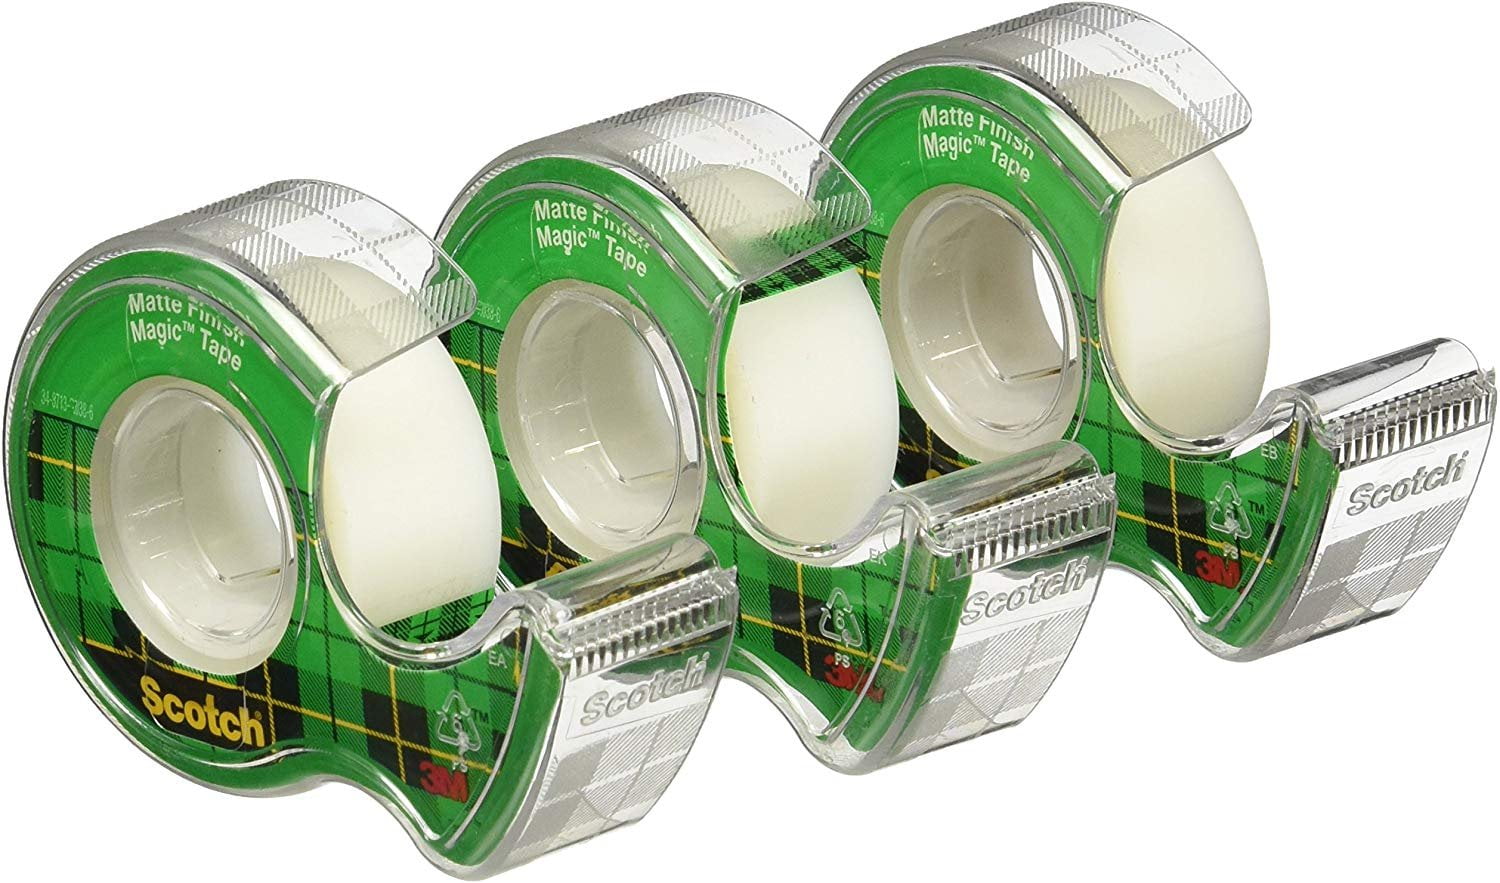 Boxed Wide Width 1 x 2592 Inches 3 Rolls 600-72-3PK Scotch Transparent Tape Engineered for Office and Home Use 